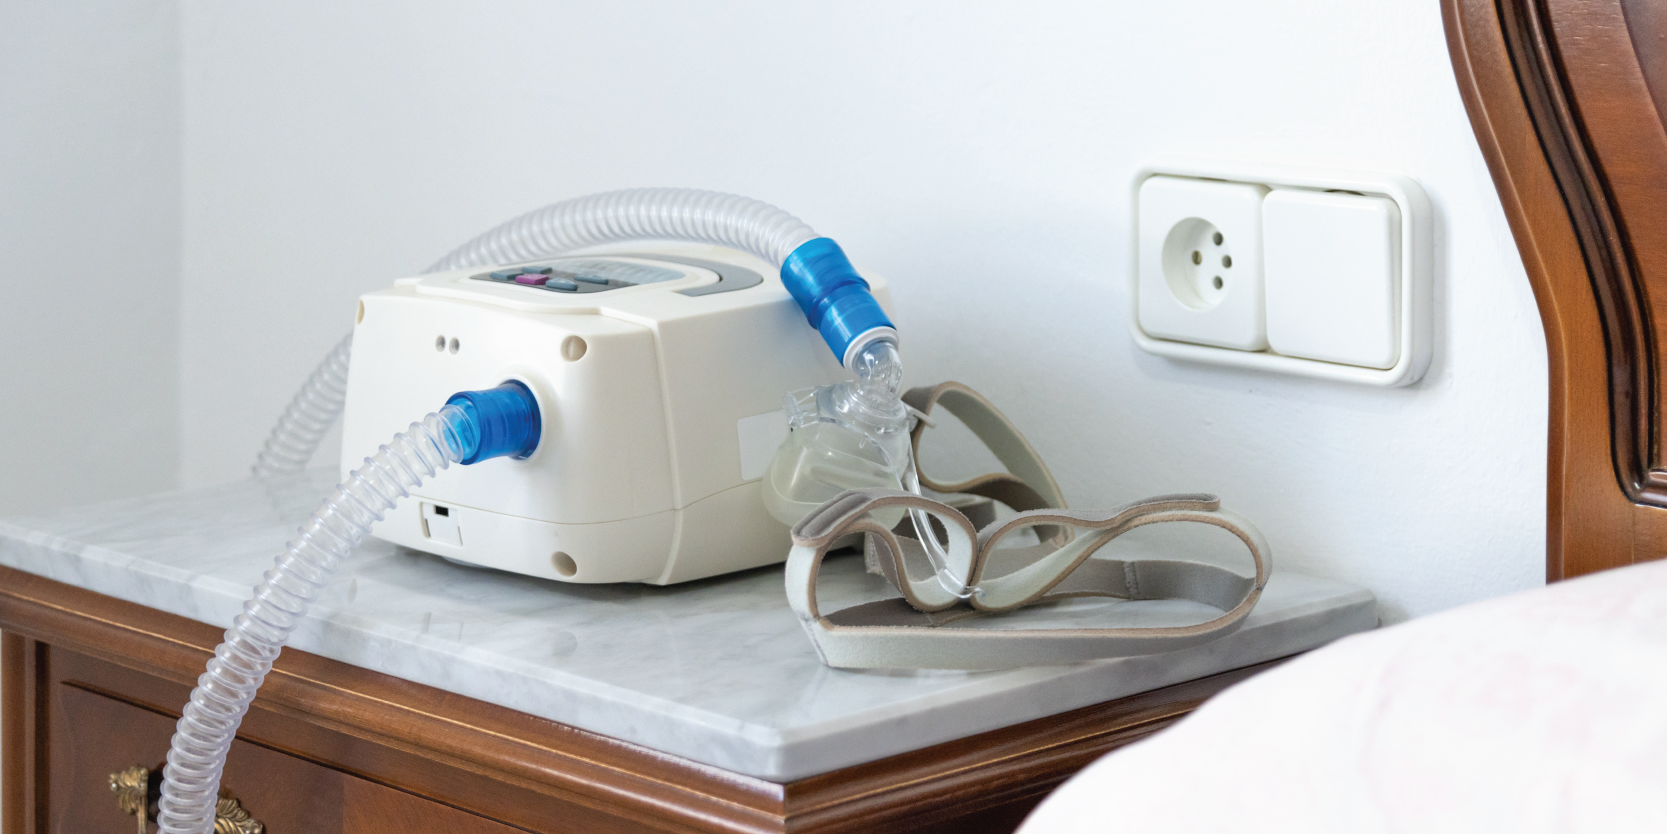 Common Risks and Complications from Home Ventilators to Be Aware Of